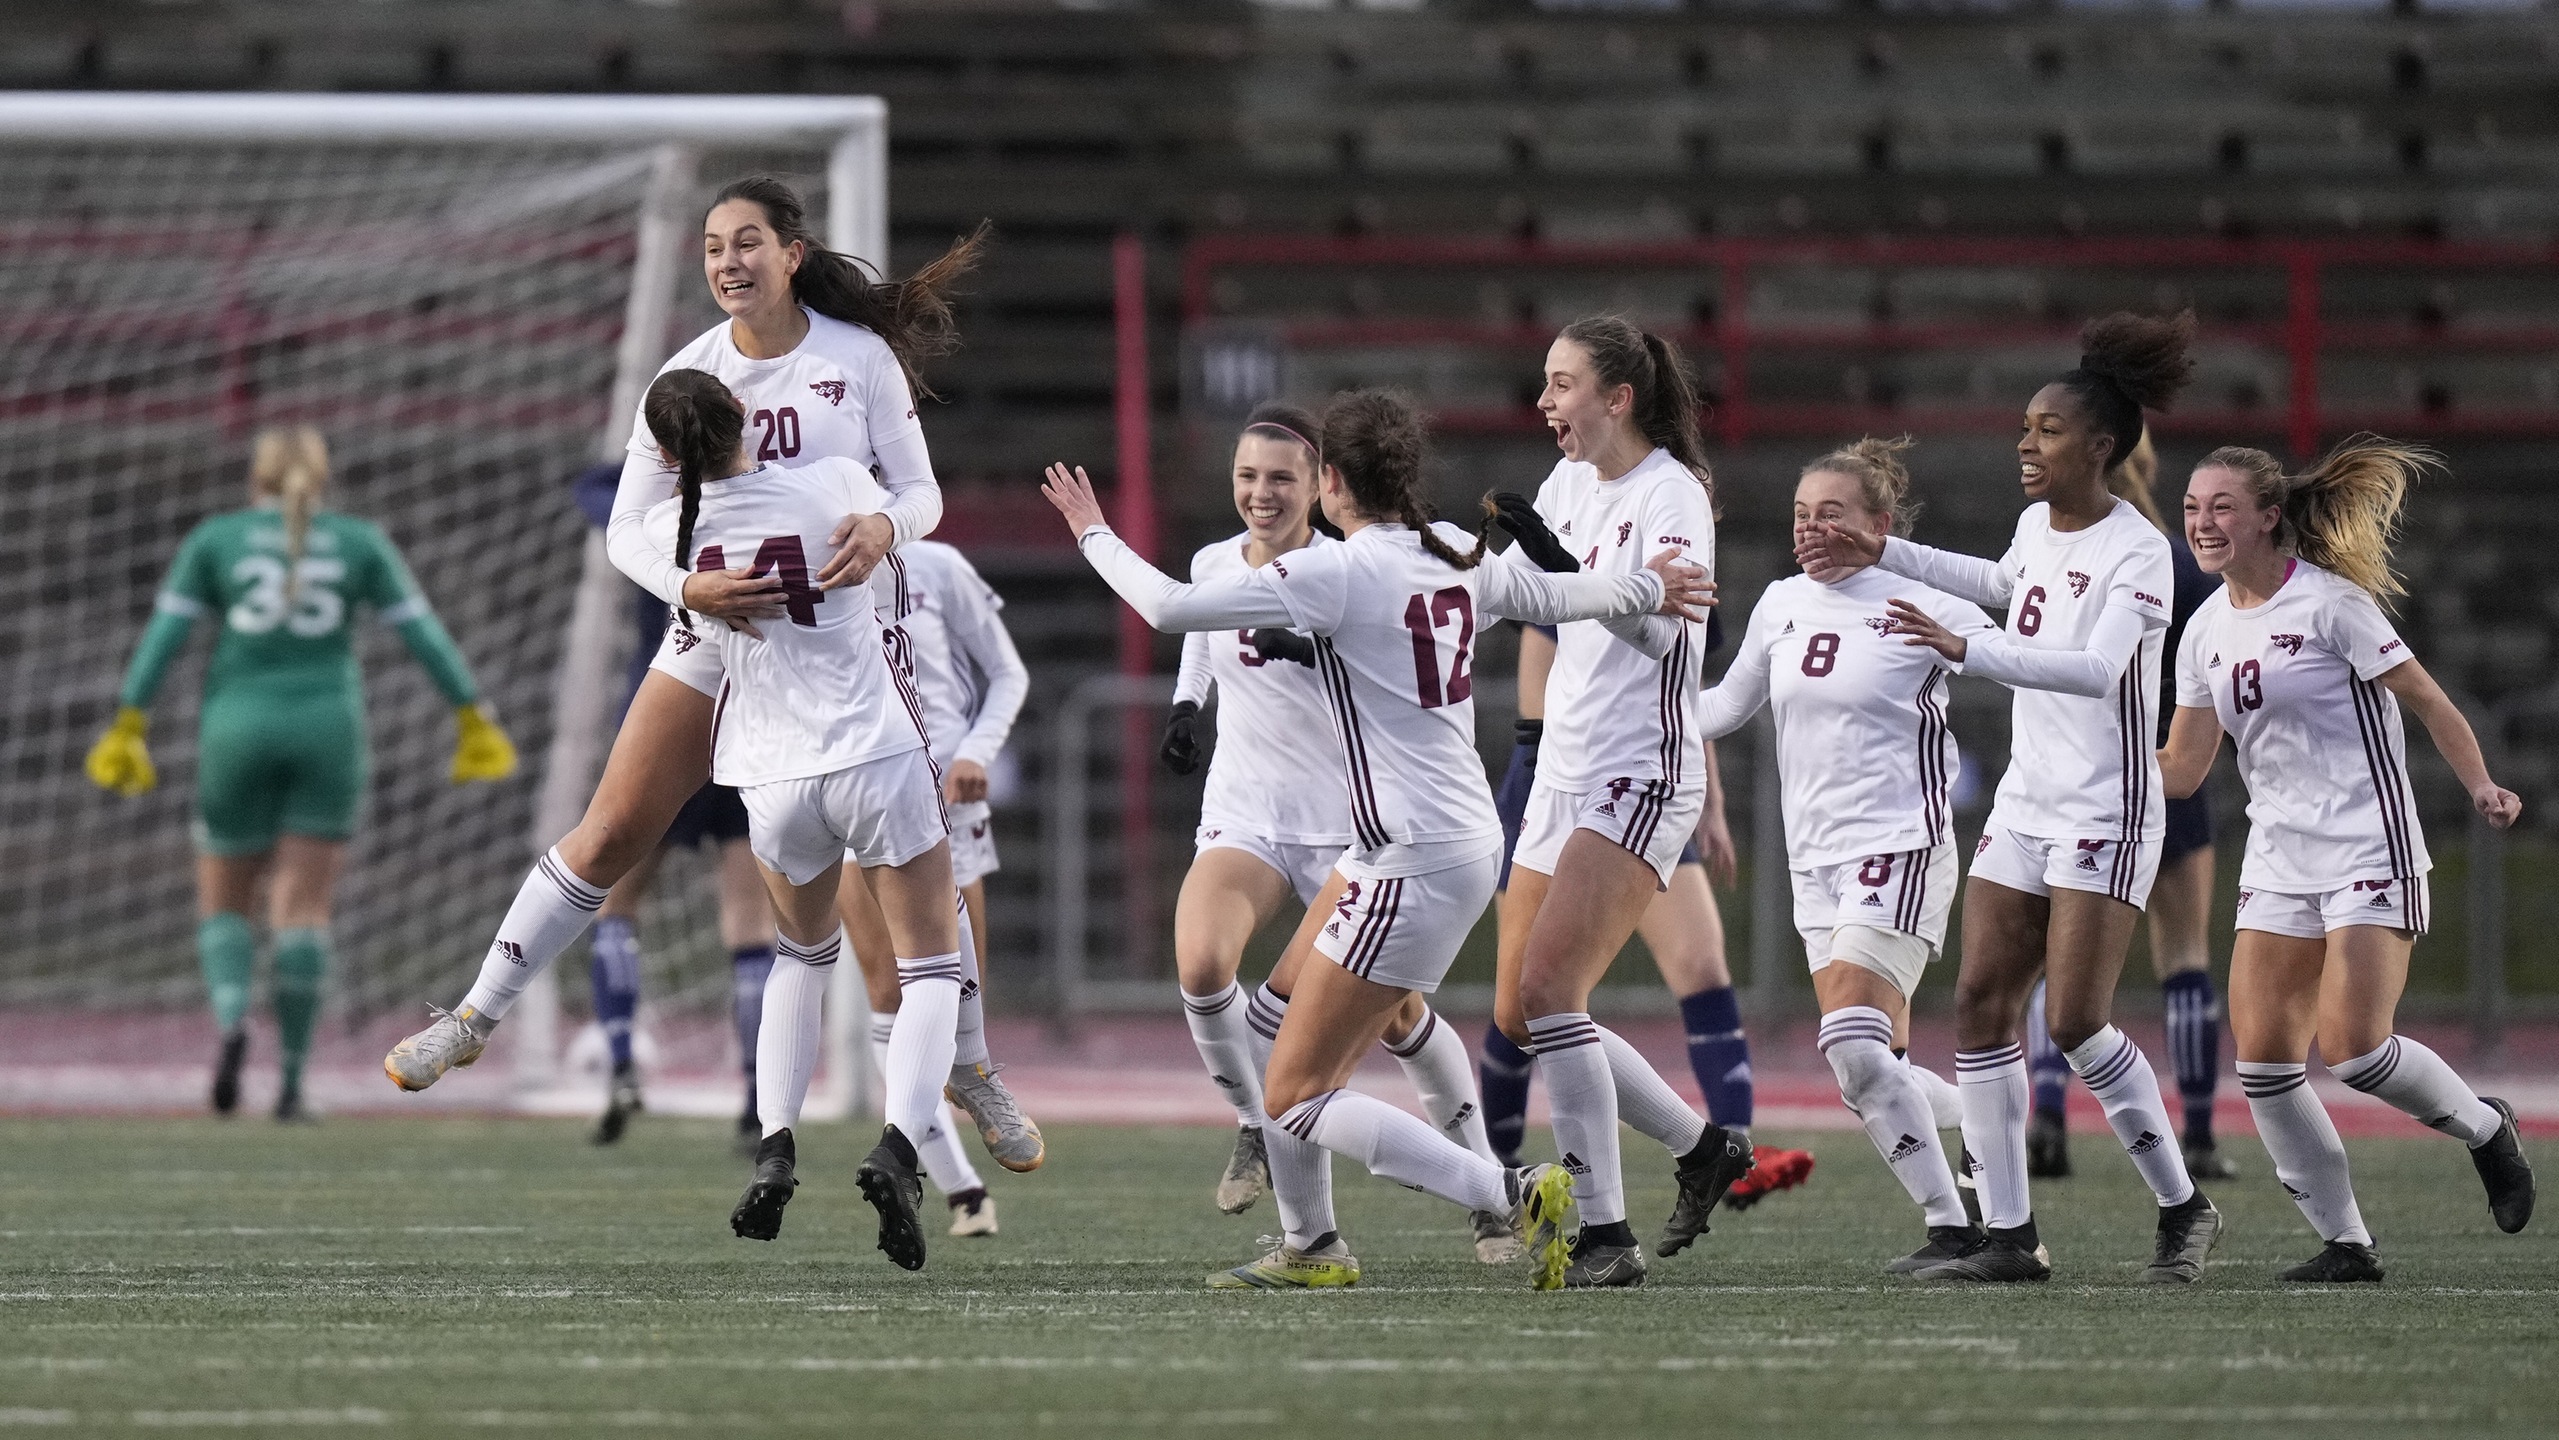 RECAP: Late goal from Provost pushes Ottawa to semis